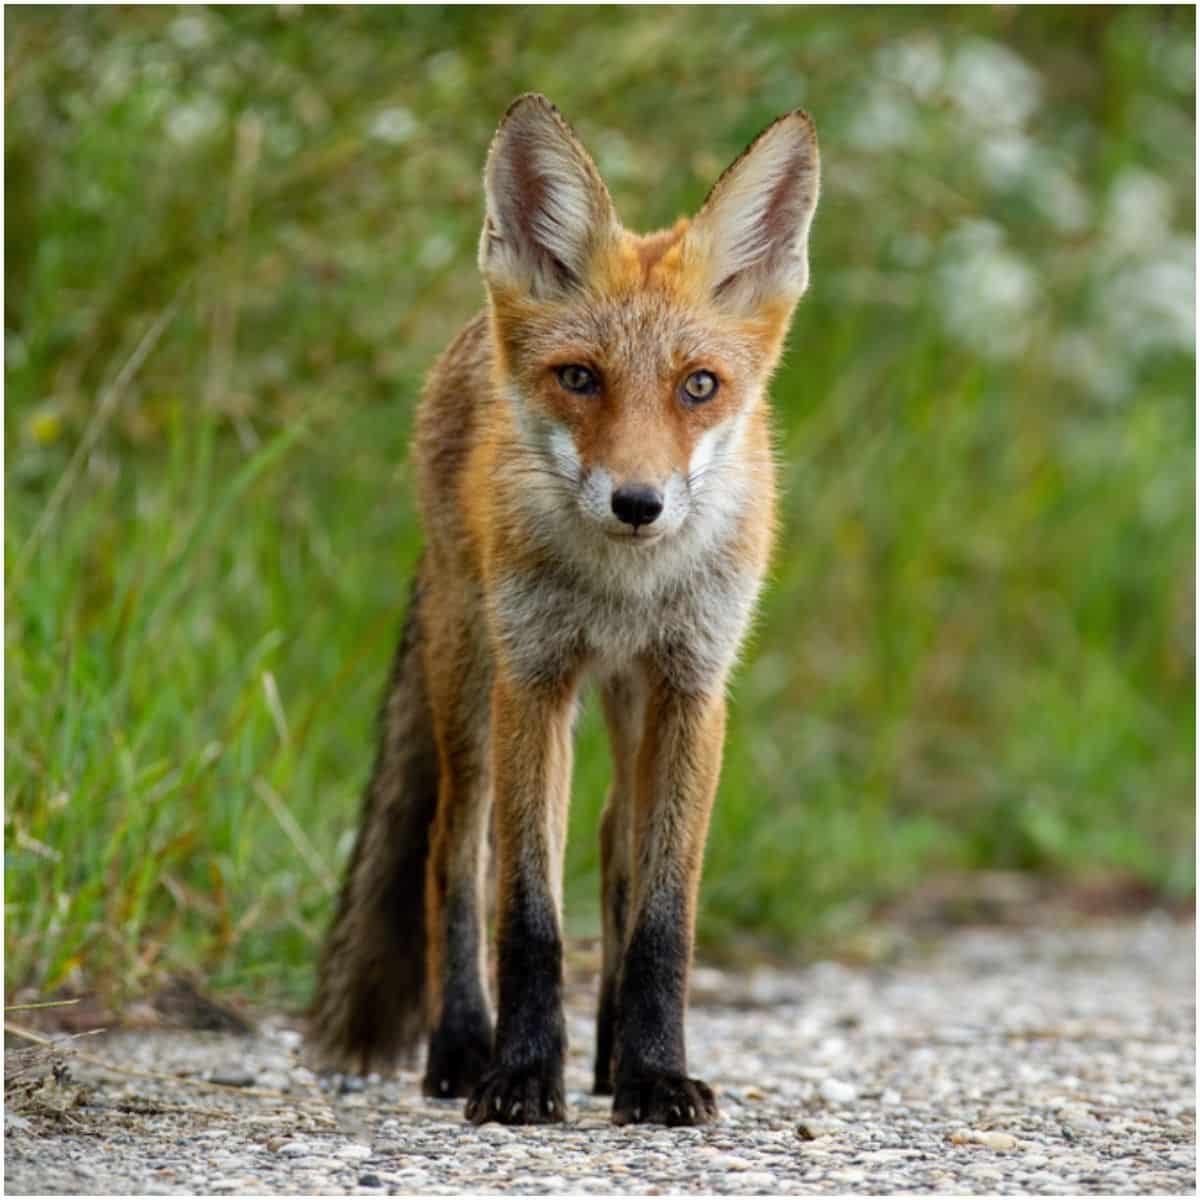 Spiritual Meaning of Fox Crossing Your Path